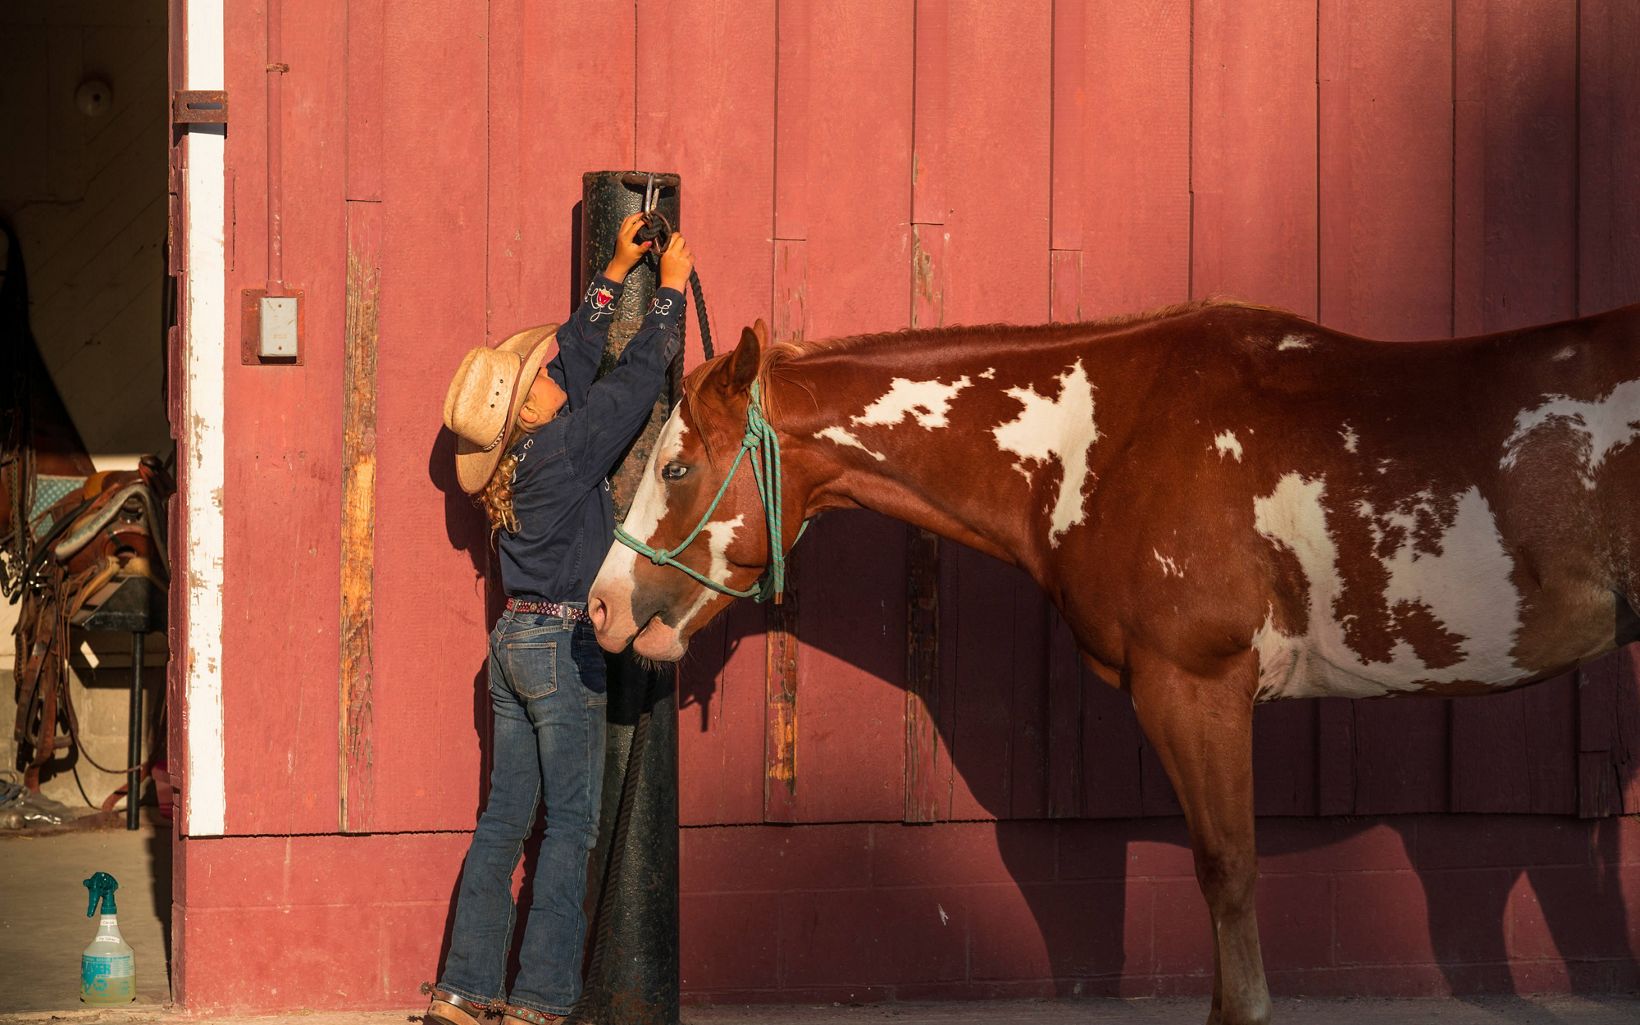 A girl in a cowboy hat ties up her horse.